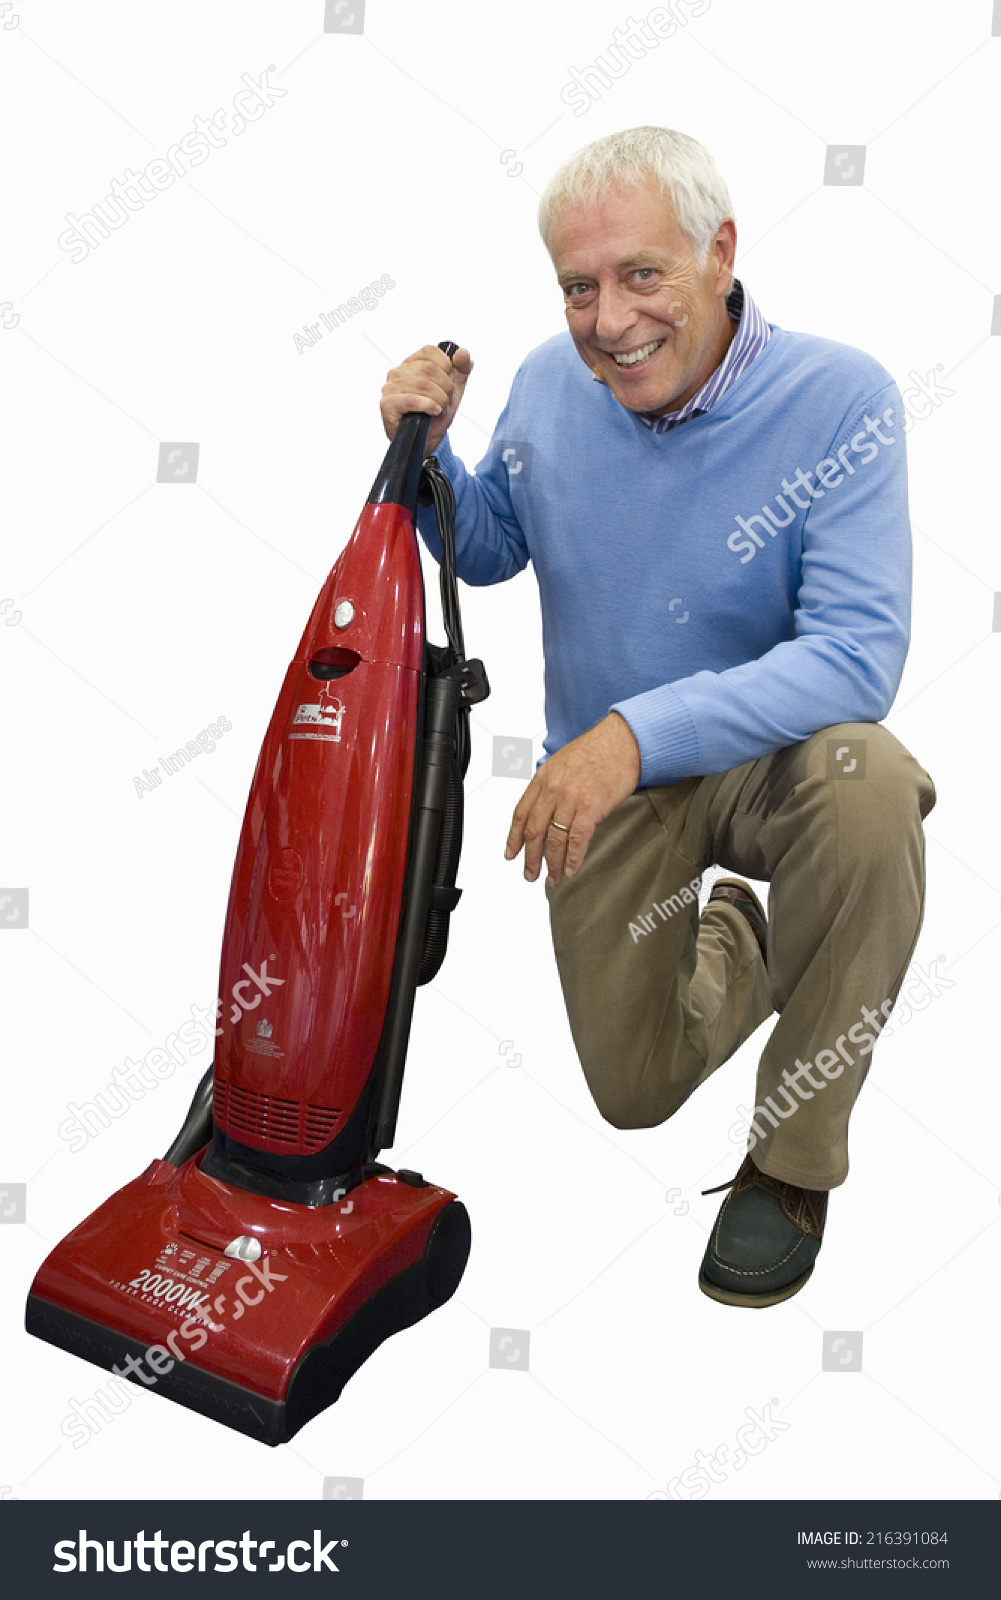 stock-photo-senior-man-holding-vacuum-cleaner-on-one-knee-cut-out-216391084.jpg